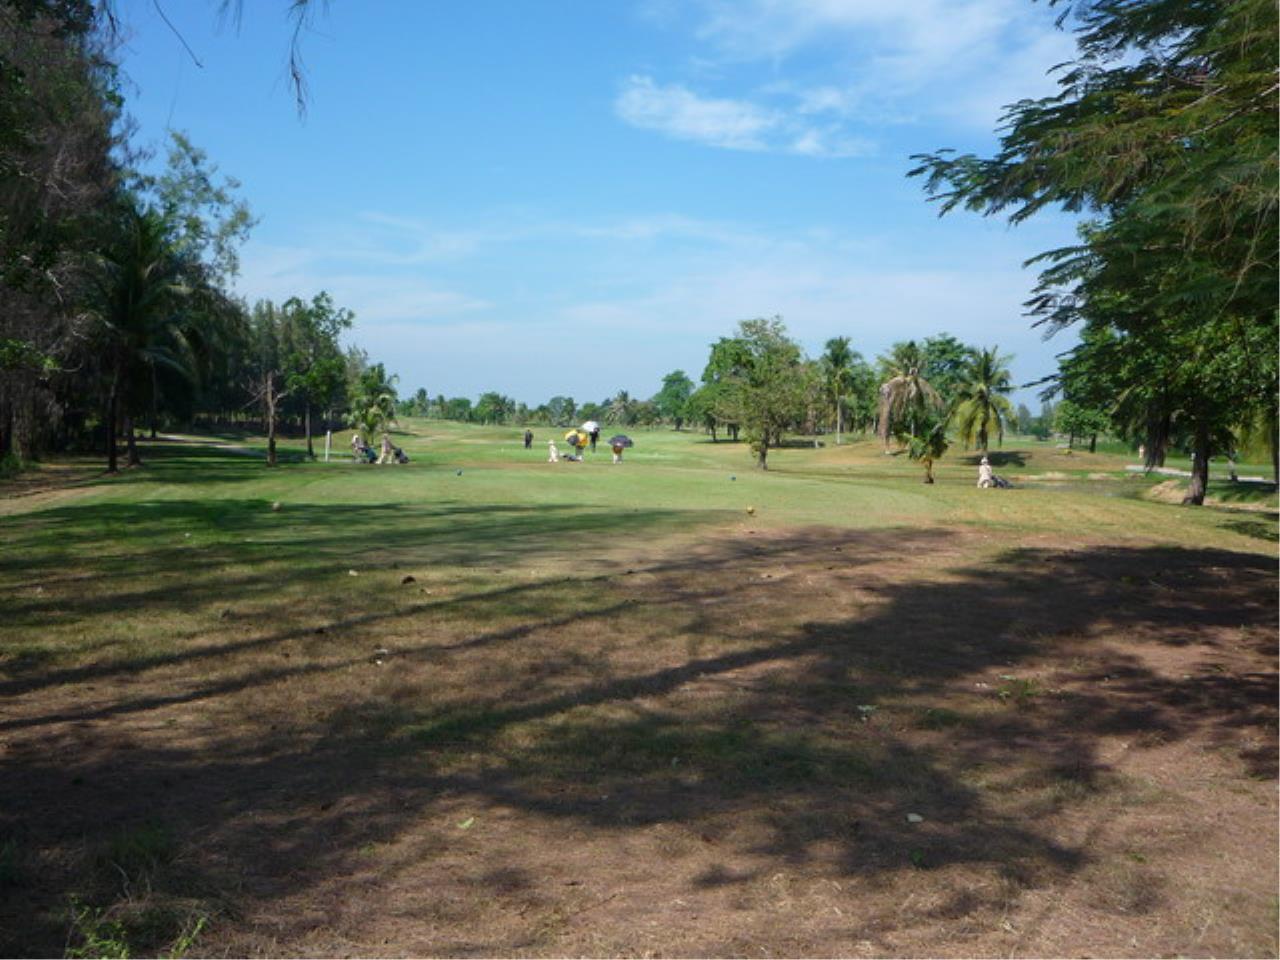 Forbest Properties Agency's 29565 - Banharn-Jamsai Road, Nakhon Pathom, Golf course for sale, area 513 acres 2